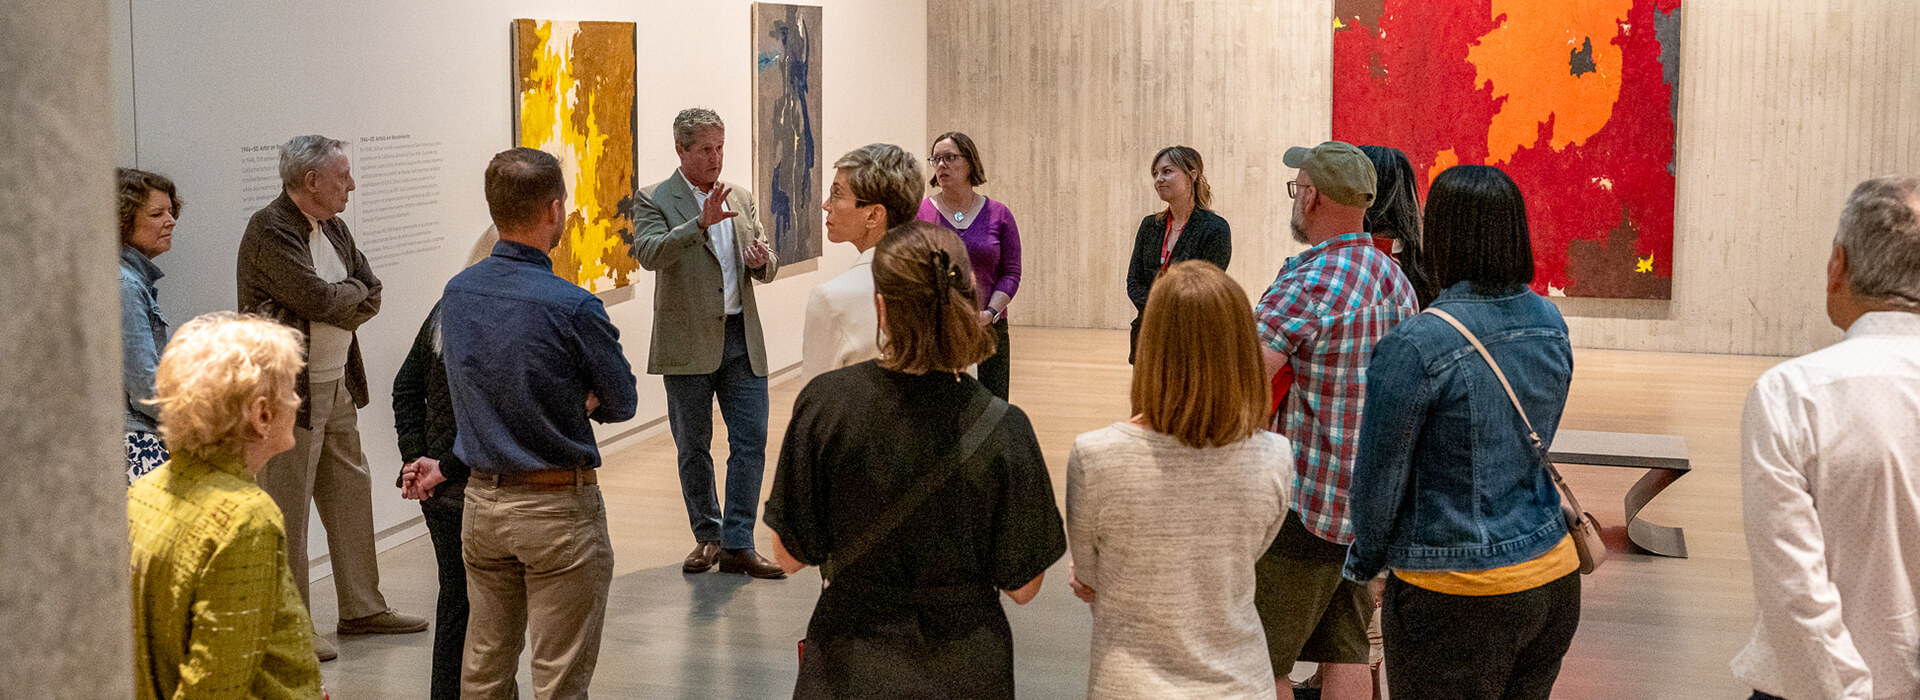 A group of people go on a tour in the Clyfford Still Museum galleries